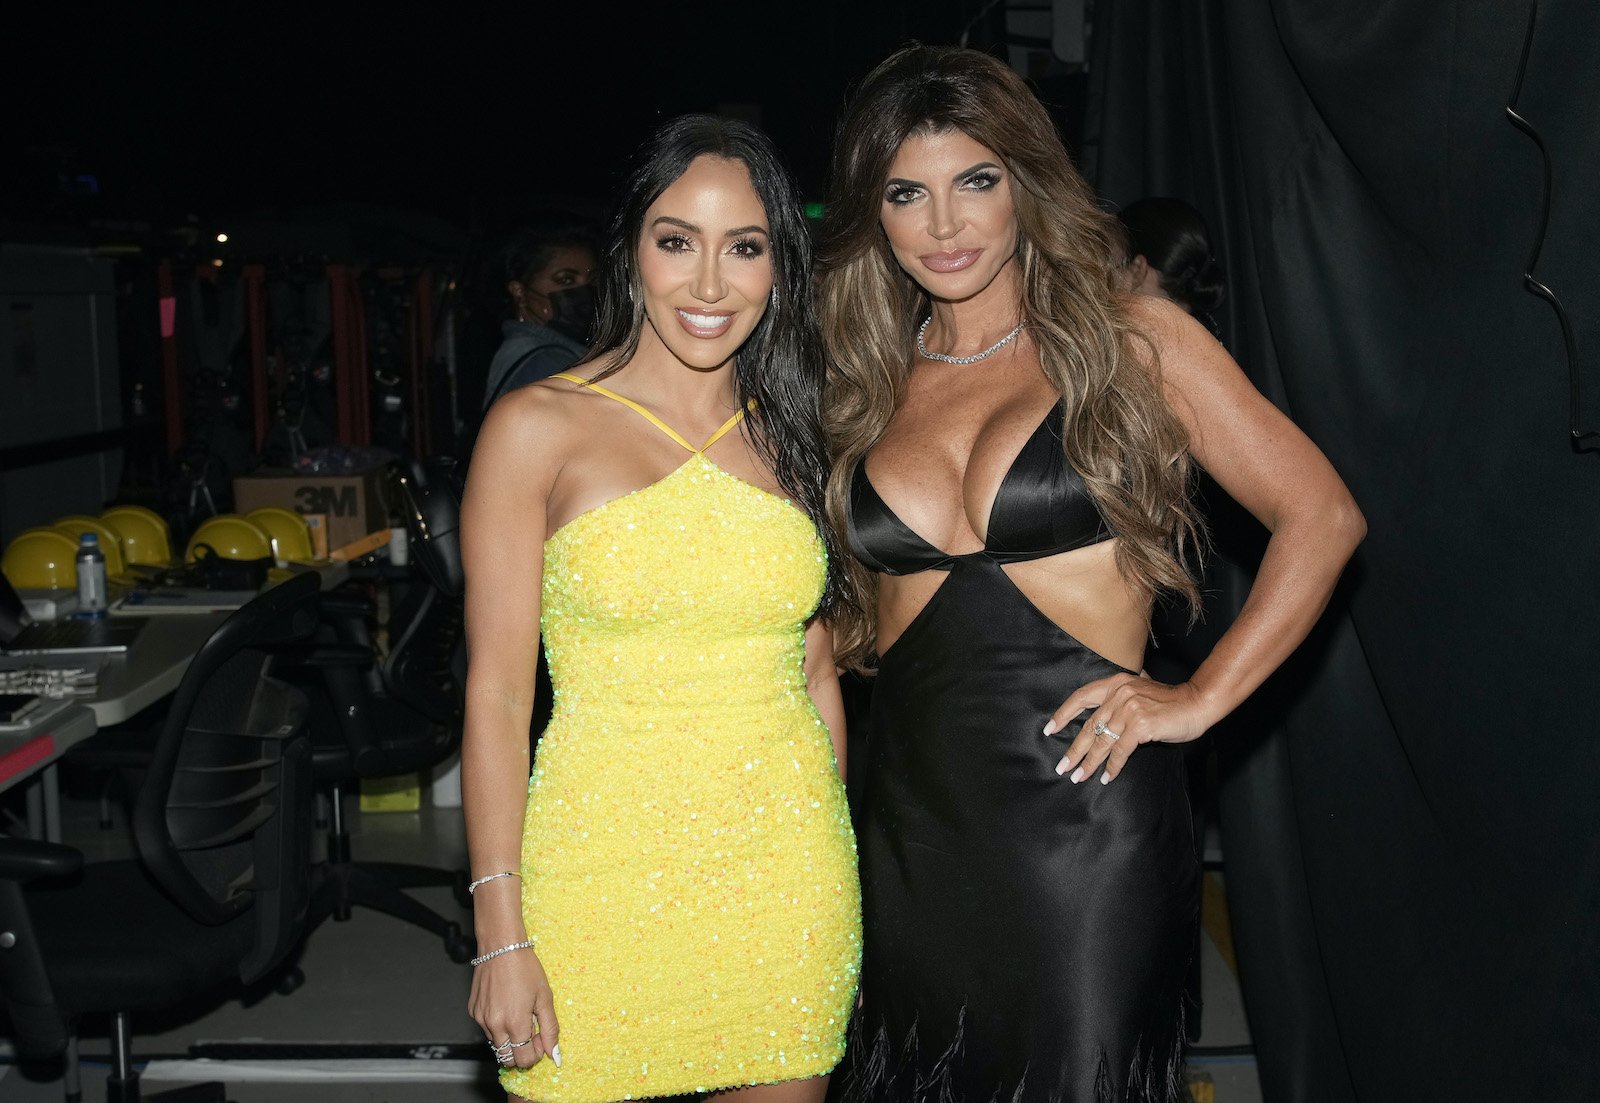 Melissa Gorga and Teresa Giudice pose next to each other and Teresa has her hand on one hip